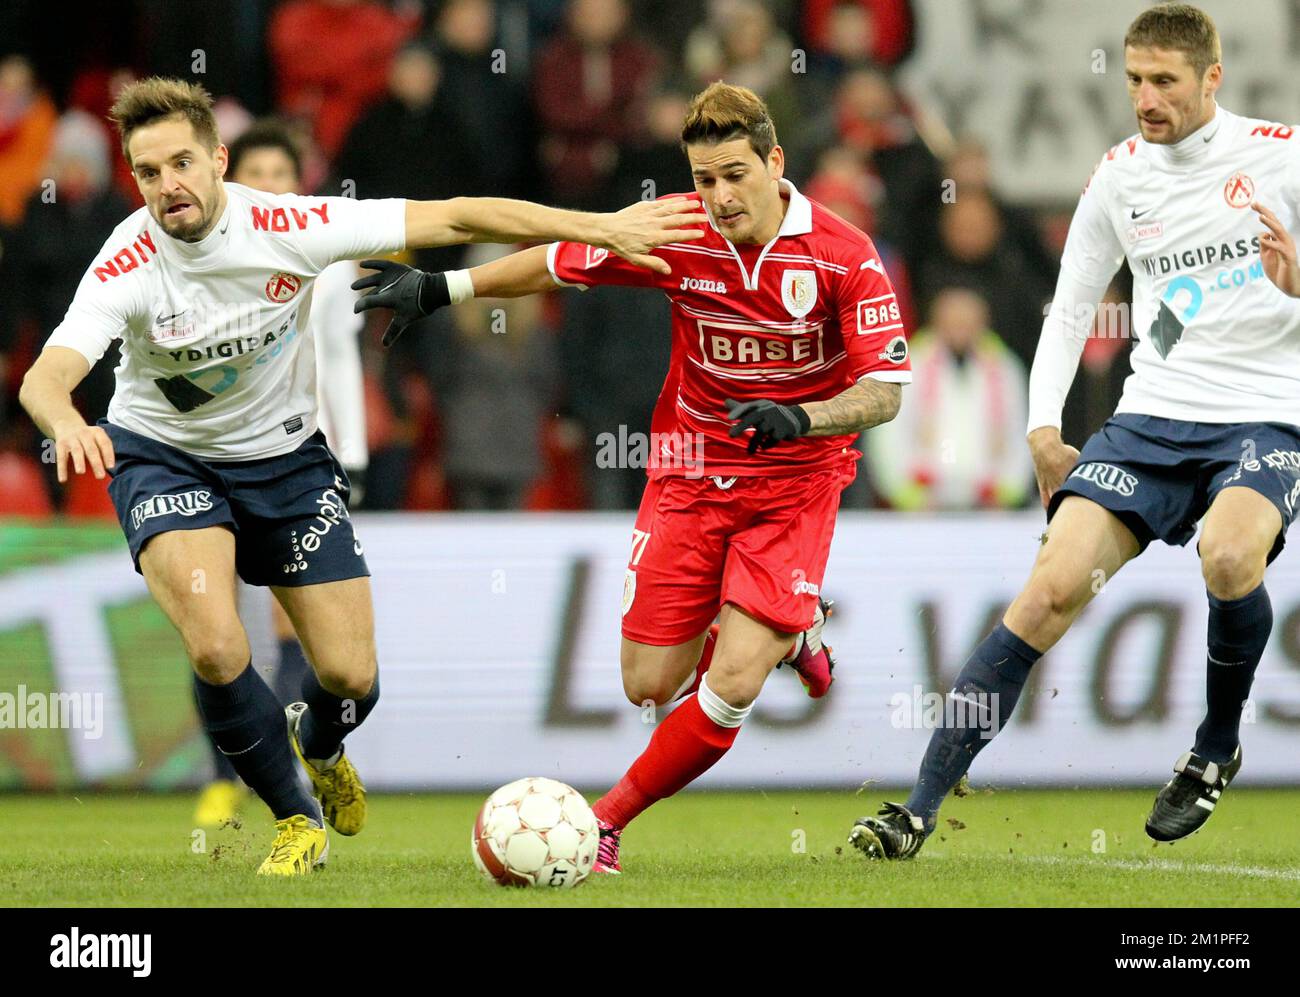 20130125 - LIEGE, BELGIUM: Kortrijk's Romain Reynaud and Standard's Maor Bar Buzaglo fight for the ball during the Jupiler Pro League match between Standard de Liege and KV Kortrijk, in Liege, Friday 25 January 2013, on day 24 of the Belgian soccer championship. BELGA PHOTO VIRGINIE LEFOUR Stock Photo